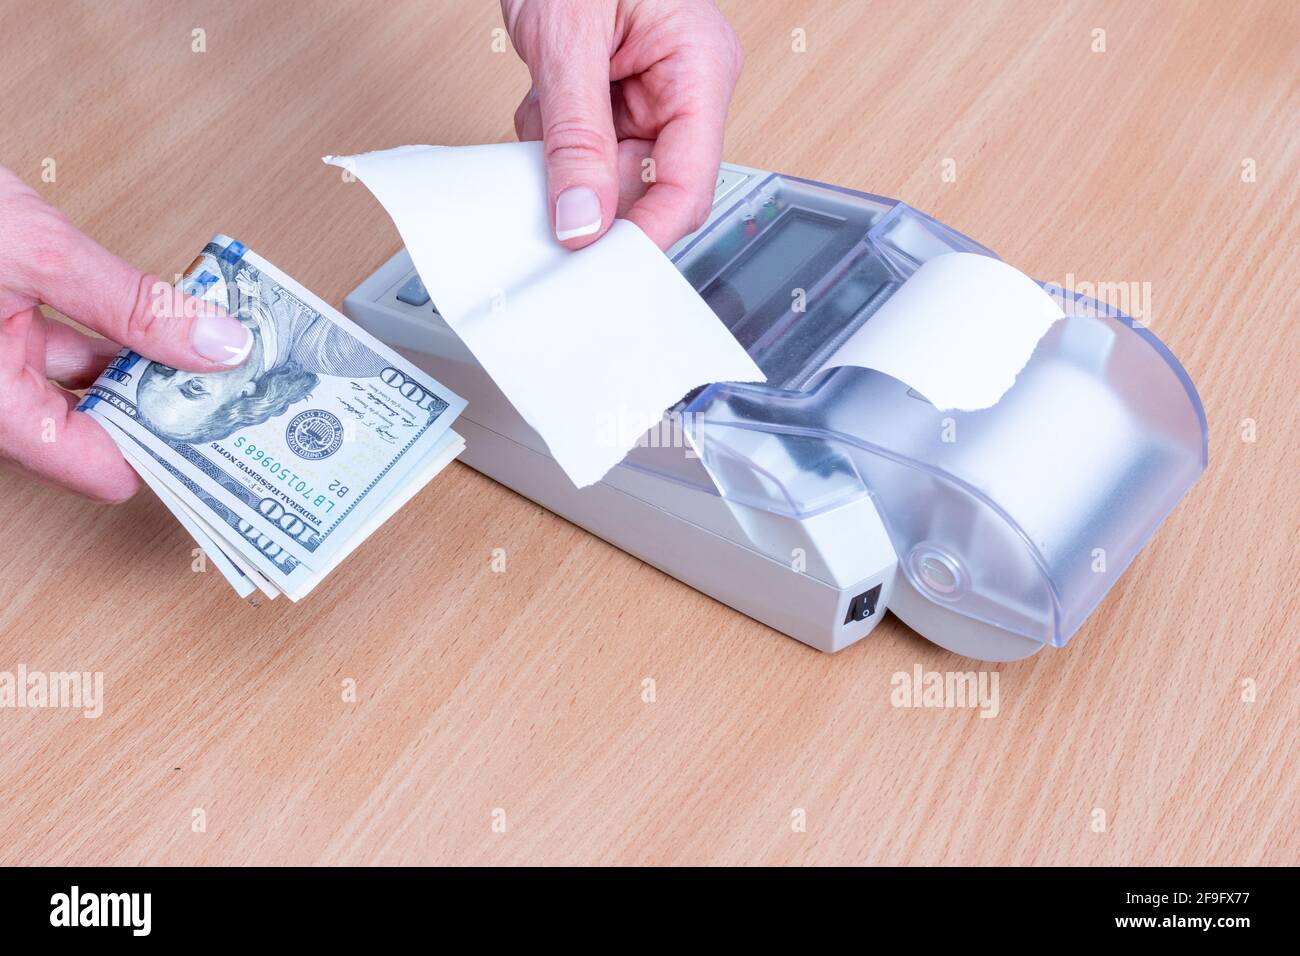 Business and financial concept. Close-up of a woman's hand holding several dollar bills above the cash register and holding a blank check form to pay Stock Photo